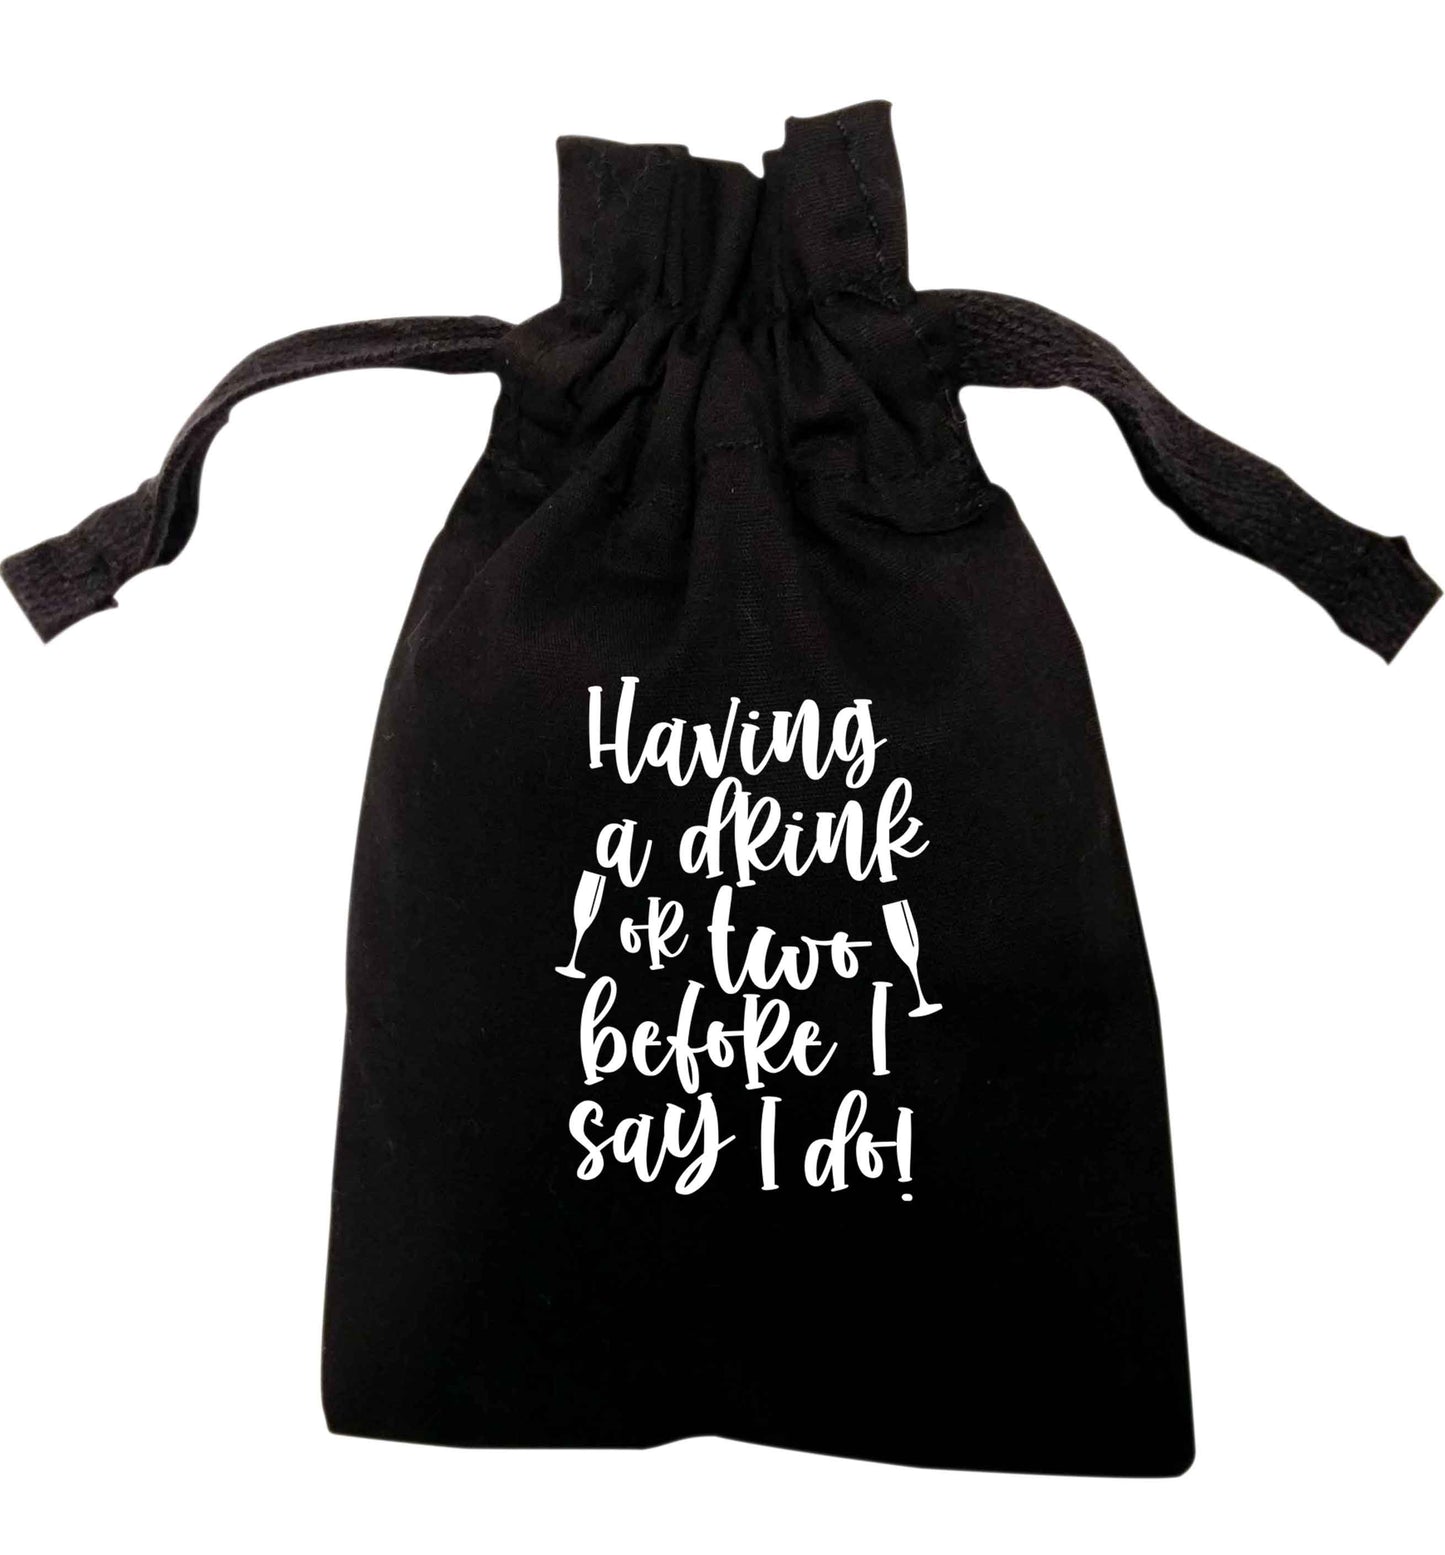 Having a drink or two before I say I do | XS - L | Pouch / Drawstring bag / Sack | Organic Cotton | Bulk discounts available!